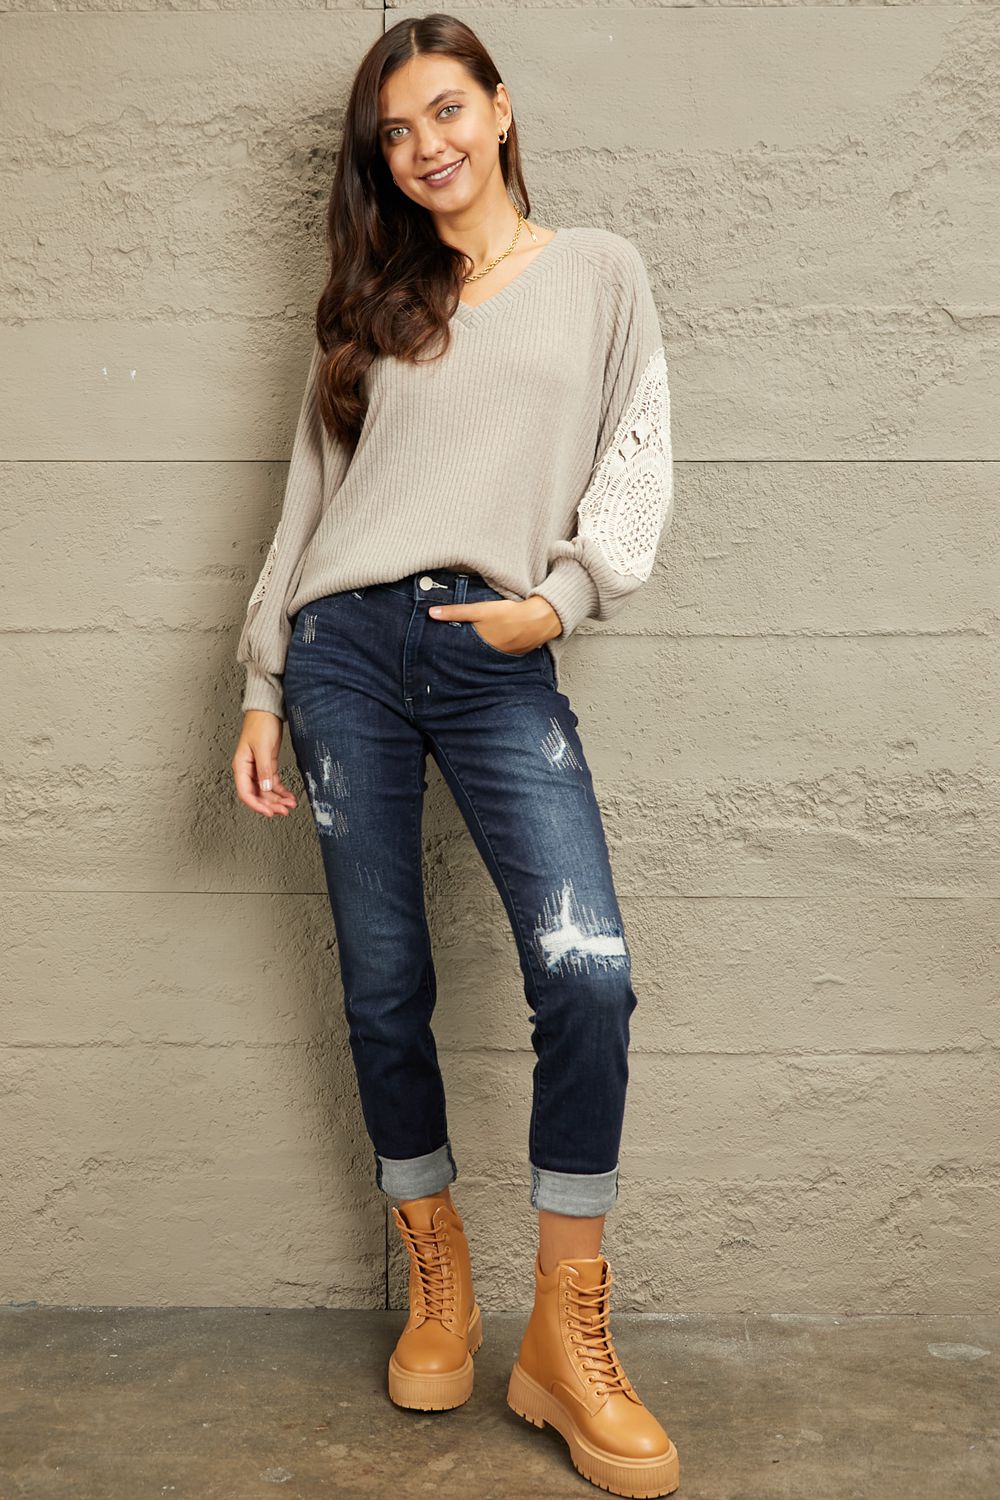 Stacy - Lace Patch Sweater (Beige)